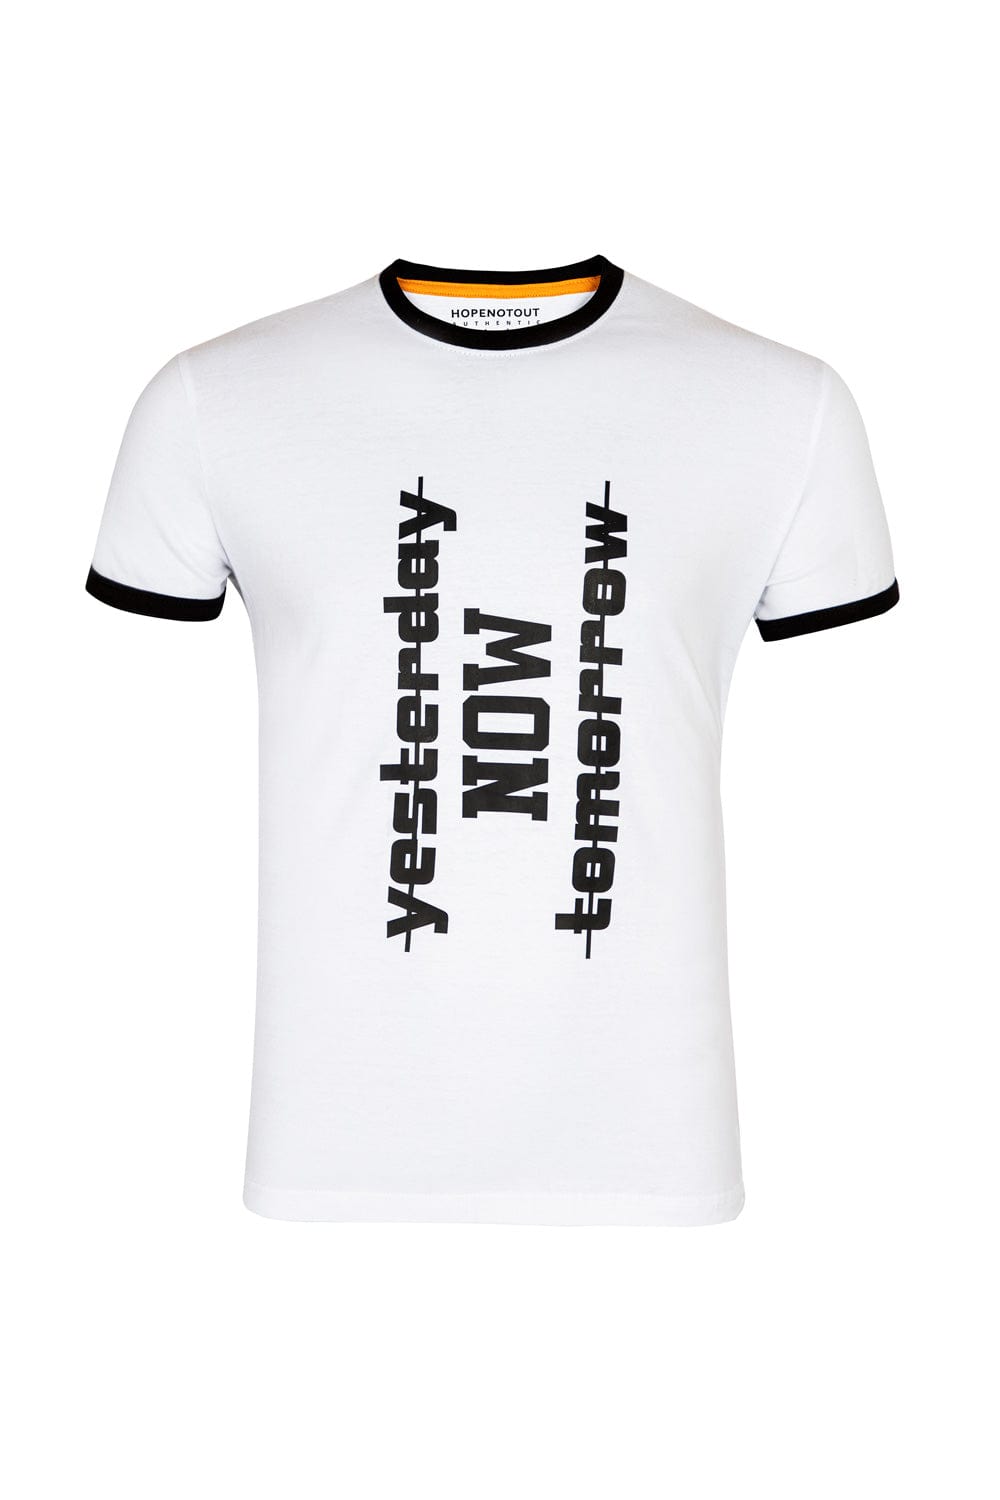 Hope Not Out by Shahid Afridi Men T-Shirt Ringer Sport Tee with Cut & Sew Panel